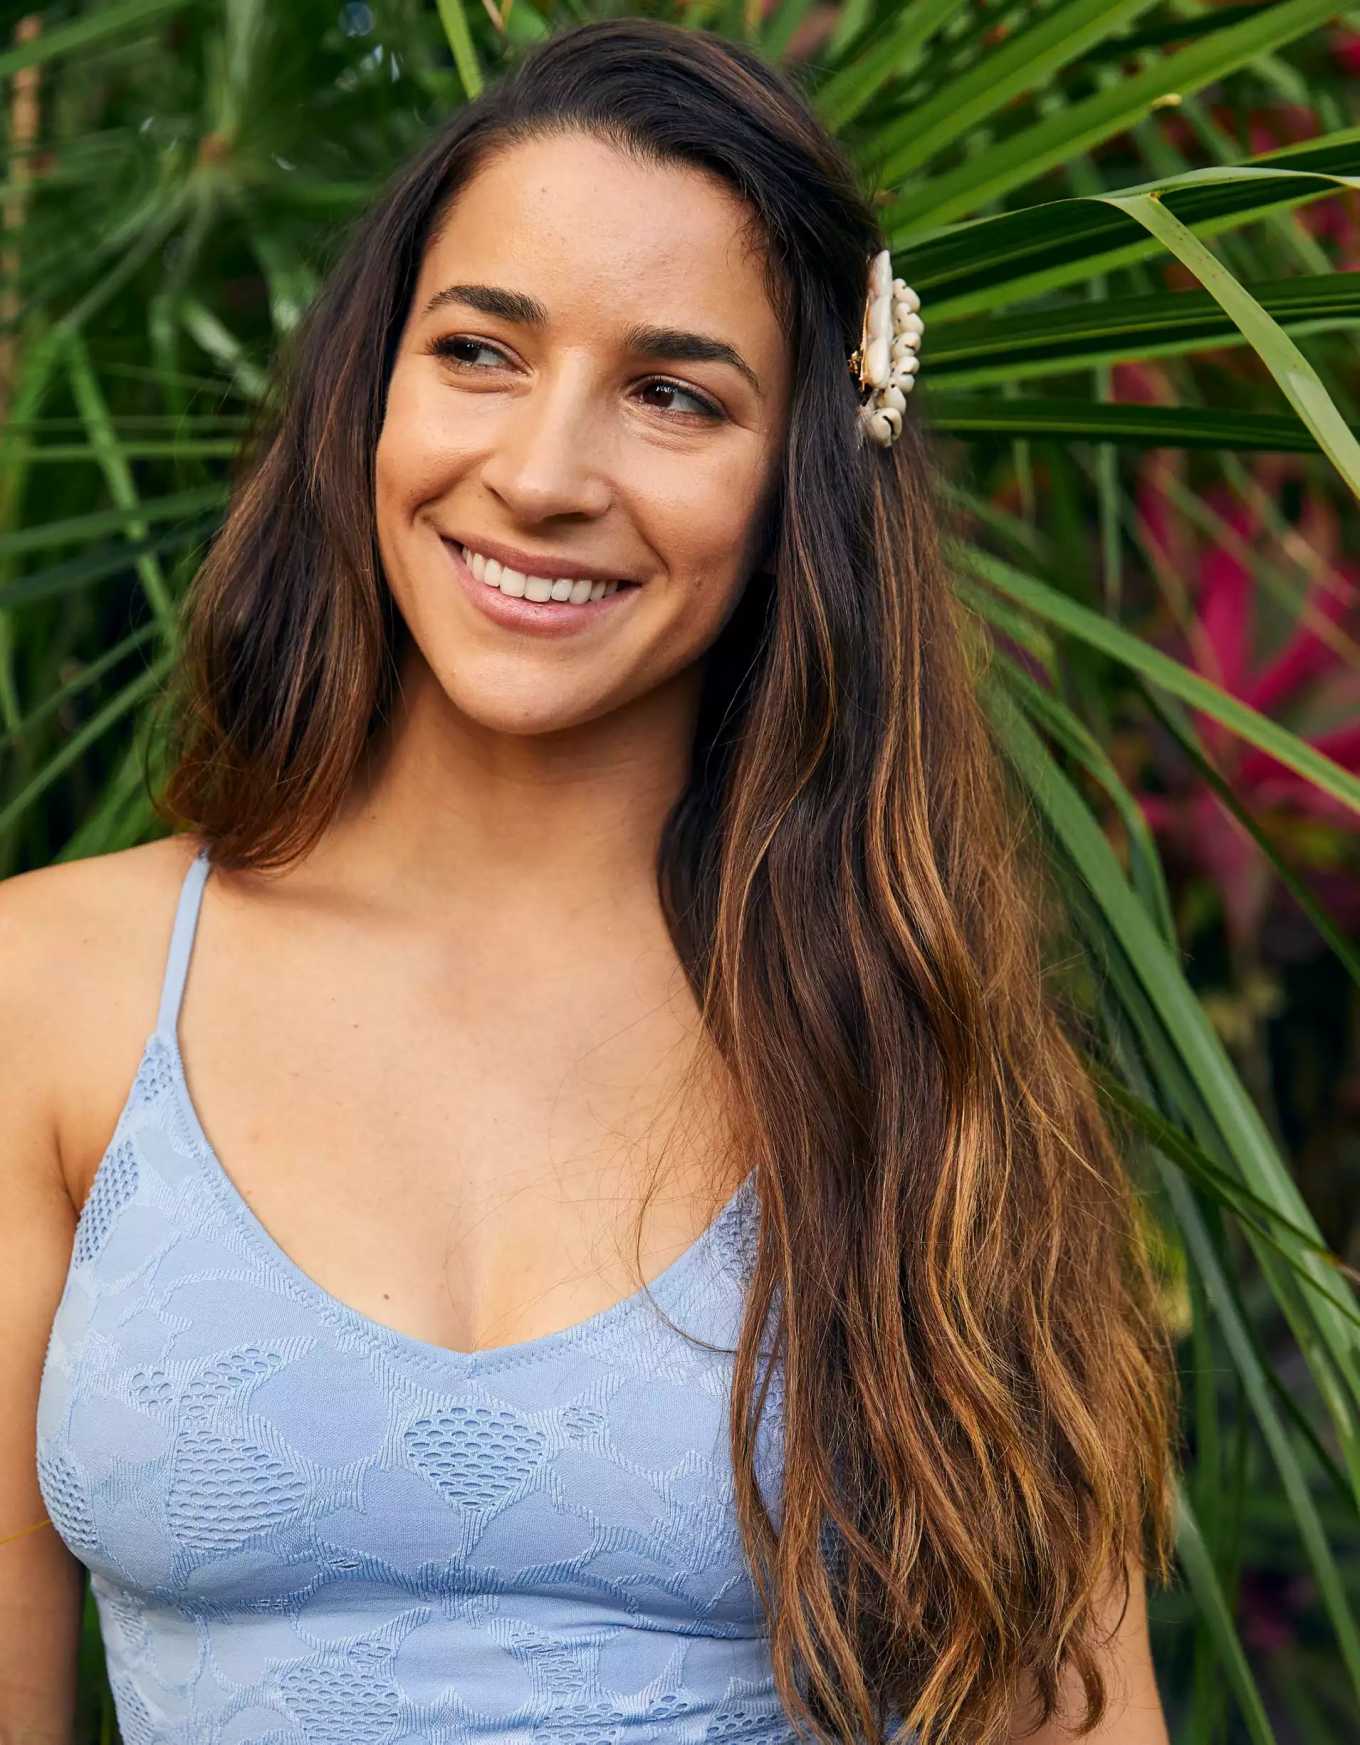 Aly Raisman for Aerieâ€™s Real Good Swimsuit Collection (March 2020)